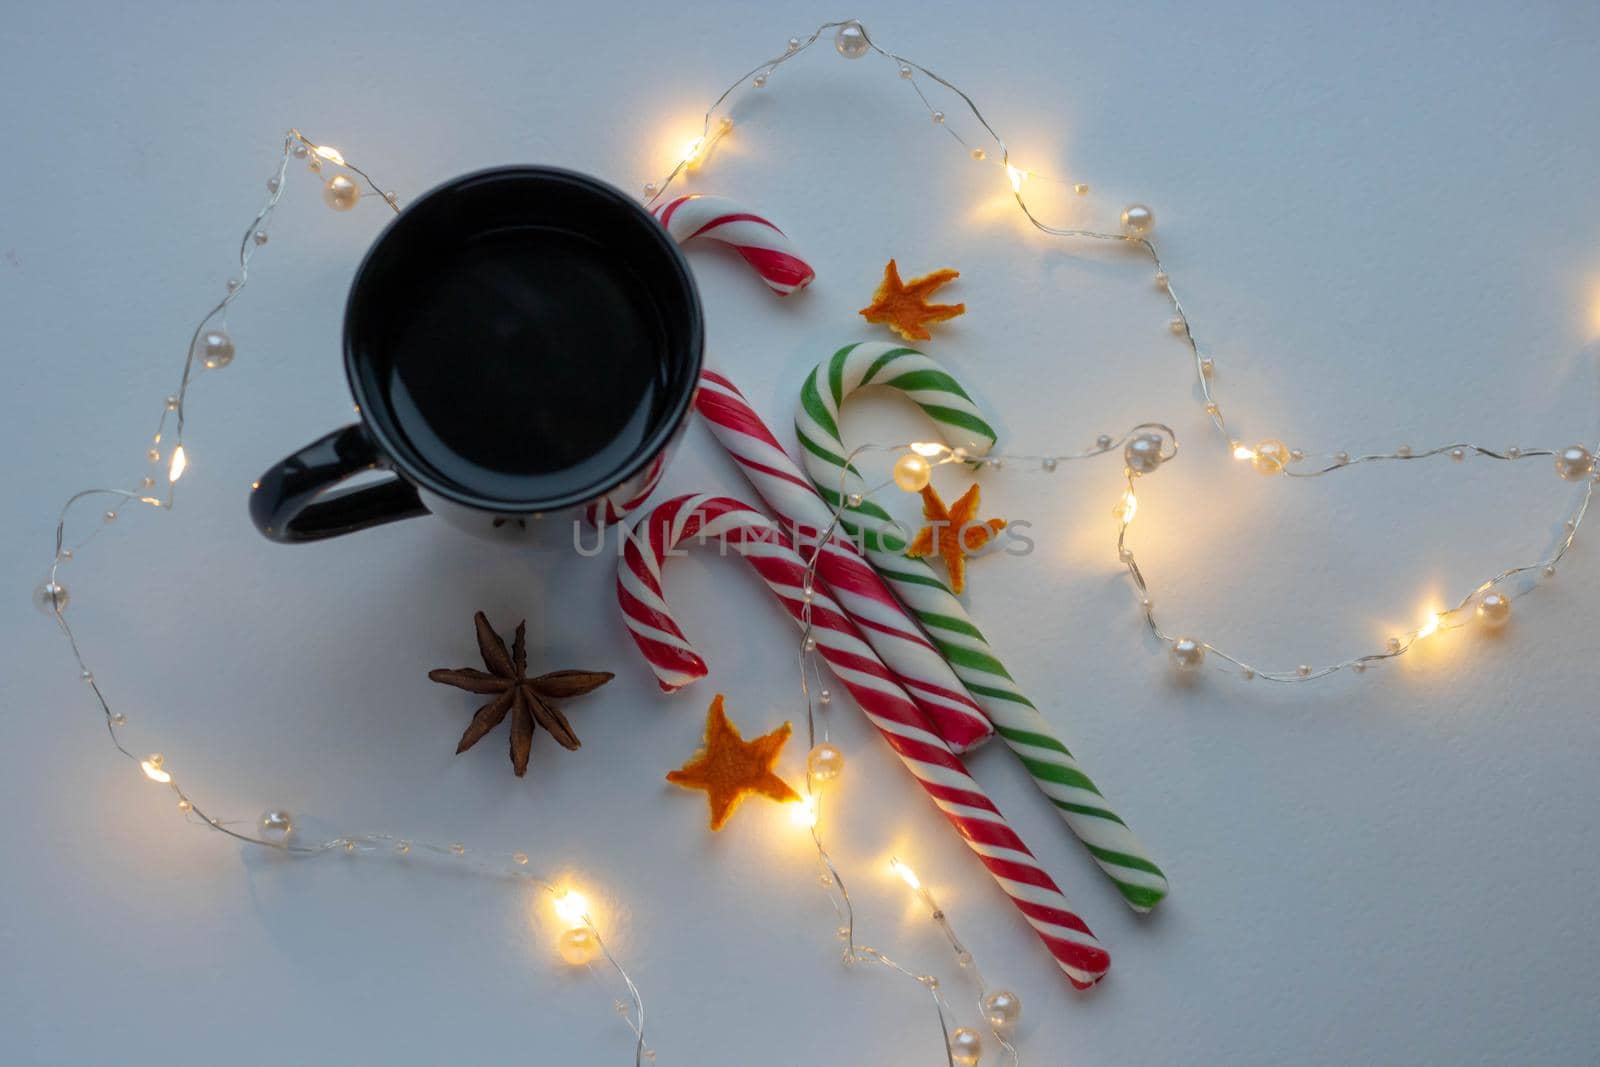 New year's concept of Christmas and winter. A black Cup of hot coffee, a candy cane, and a garland on a white background. The view from the top. Holiday Breakfast